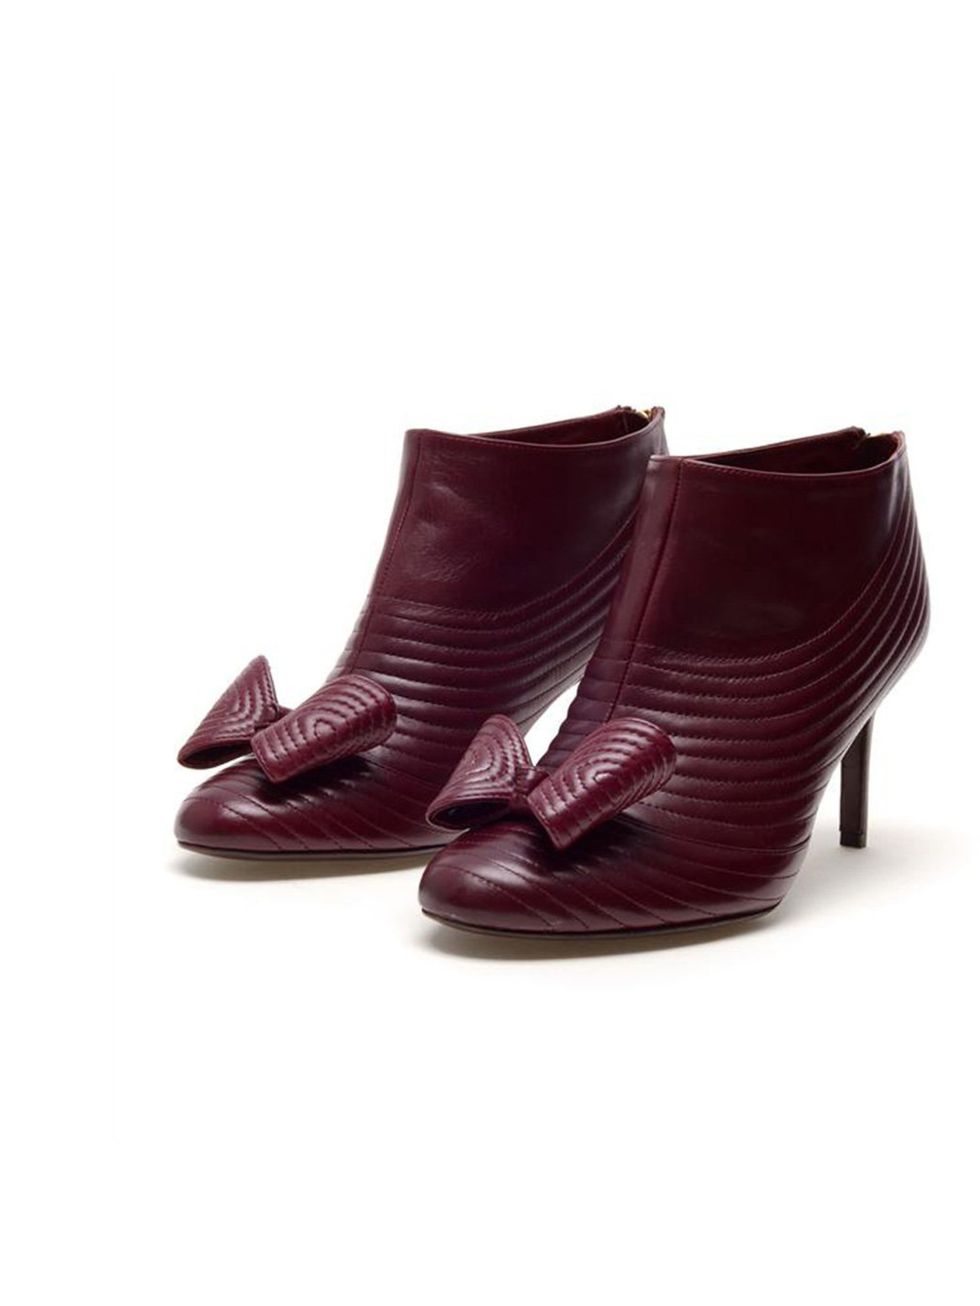 <p>Laurence Dacade boots, £630 at <a href="http://www.brownsfashion.com/Product/Women/Accessories/Shoes_and_Boots/Ribbed_leather_shoe_boots/product.aspx?p=4431275&amp;cl=4&amp;pc=1949741">www.brownsfashion.com</a></p>